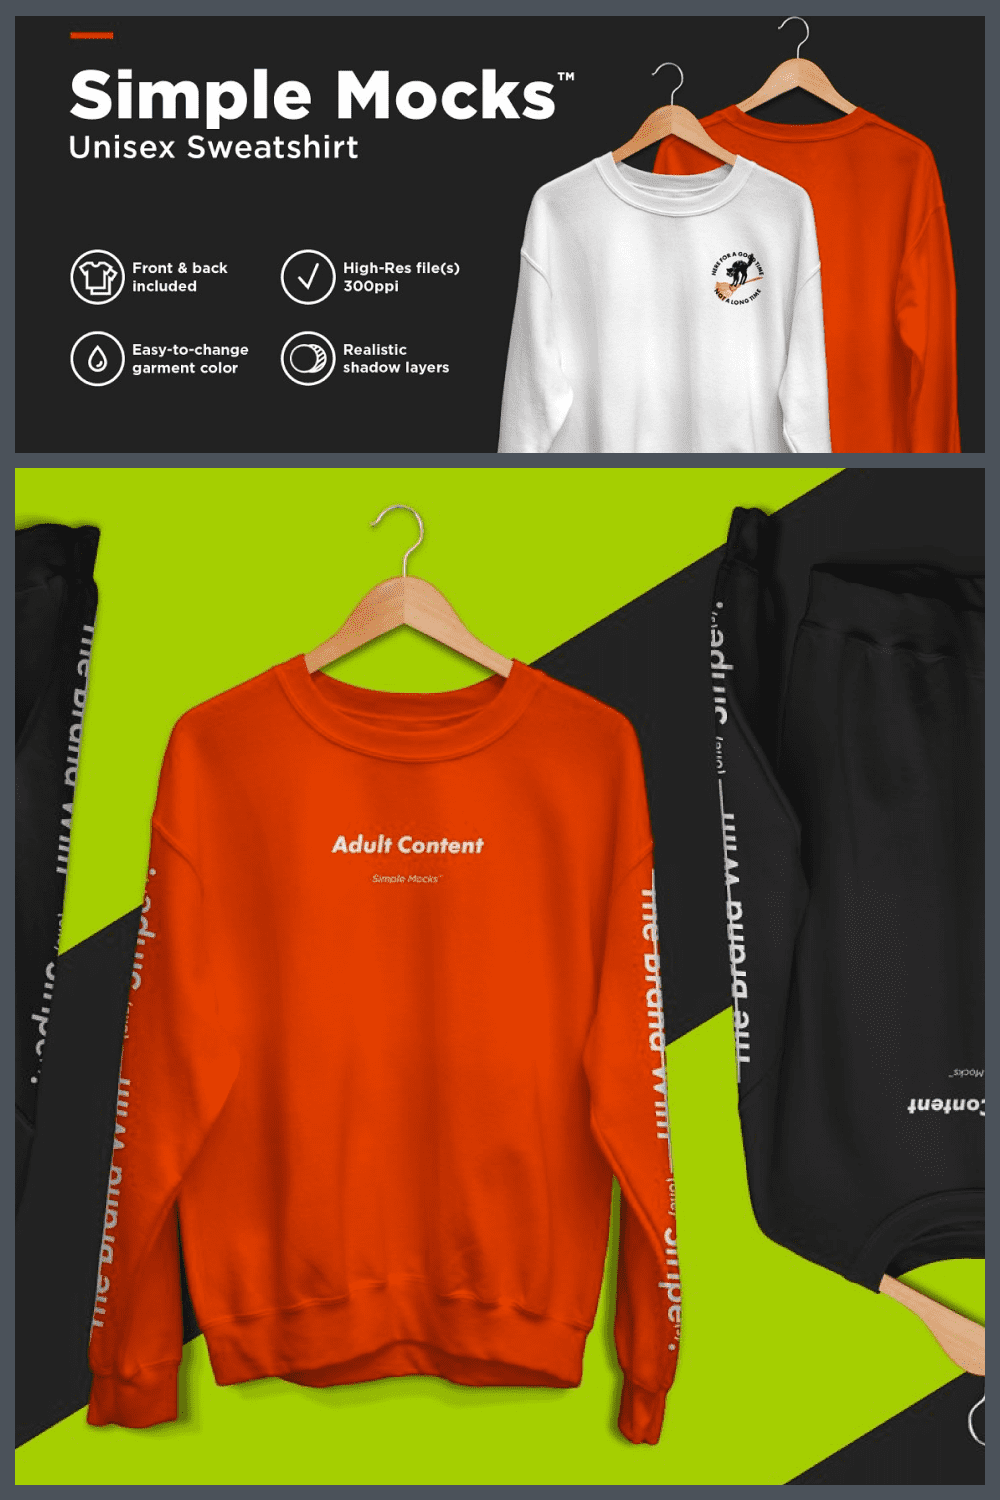 Classic sweatshirt in different colors with small lettering.